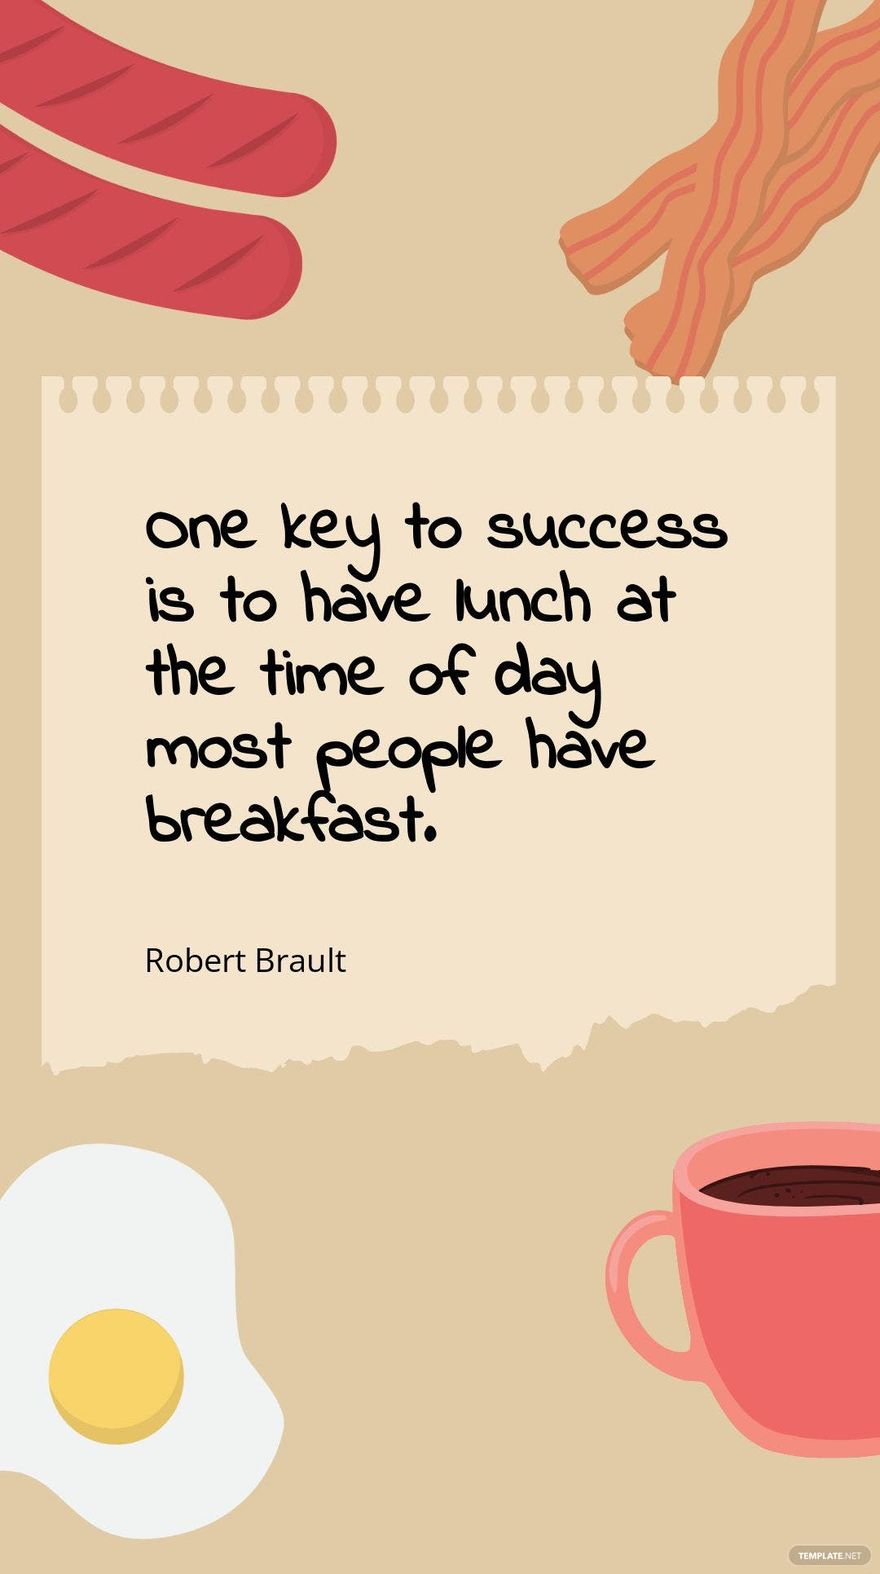 Robert Brault - One key to success is to have lunch at the time of day most people have breakfast.